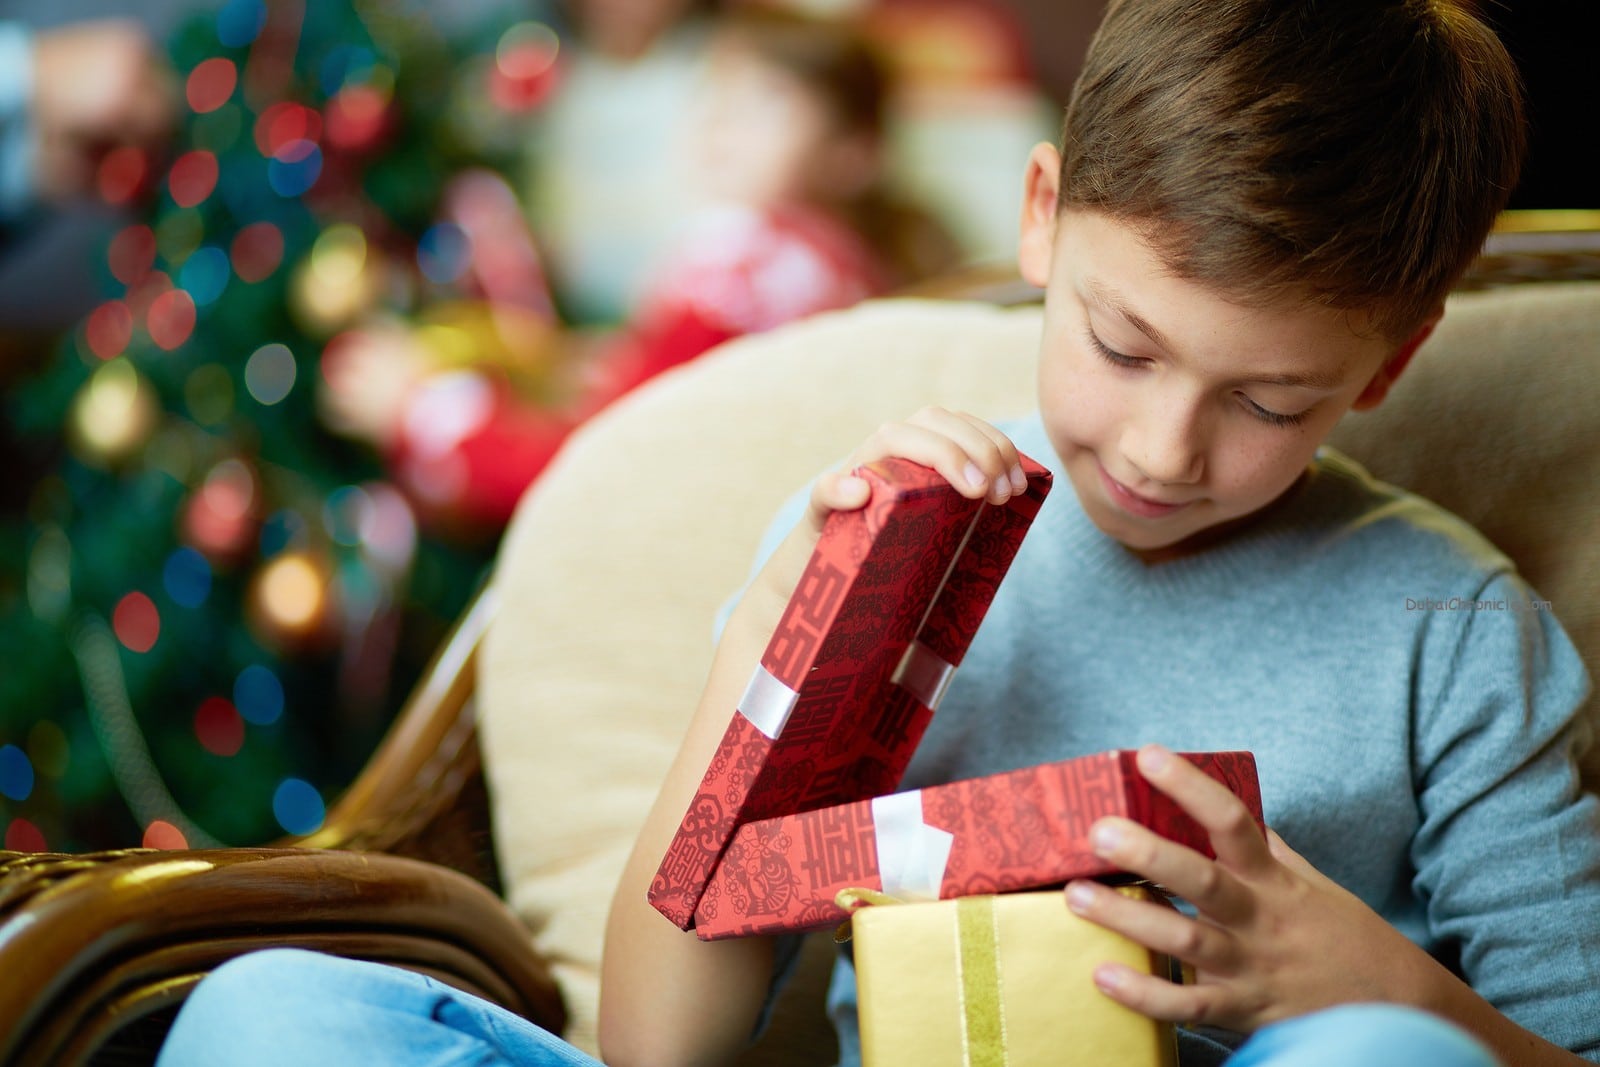 Gving your child tech as a gift